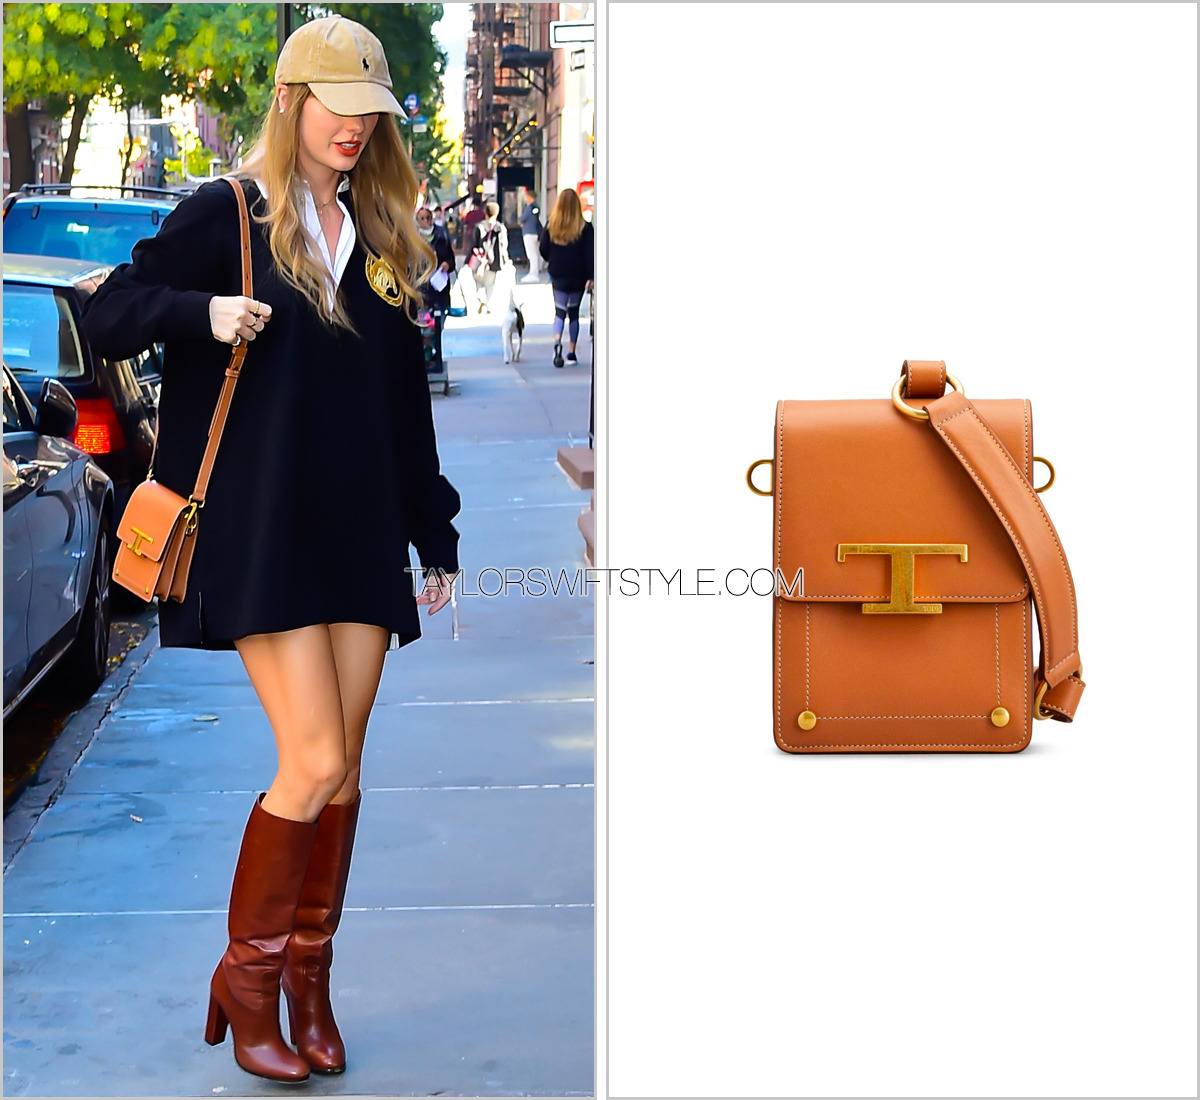 Taylor Swift Was Just Spotted Carrying the 'It' Bag in NYC - PureWow